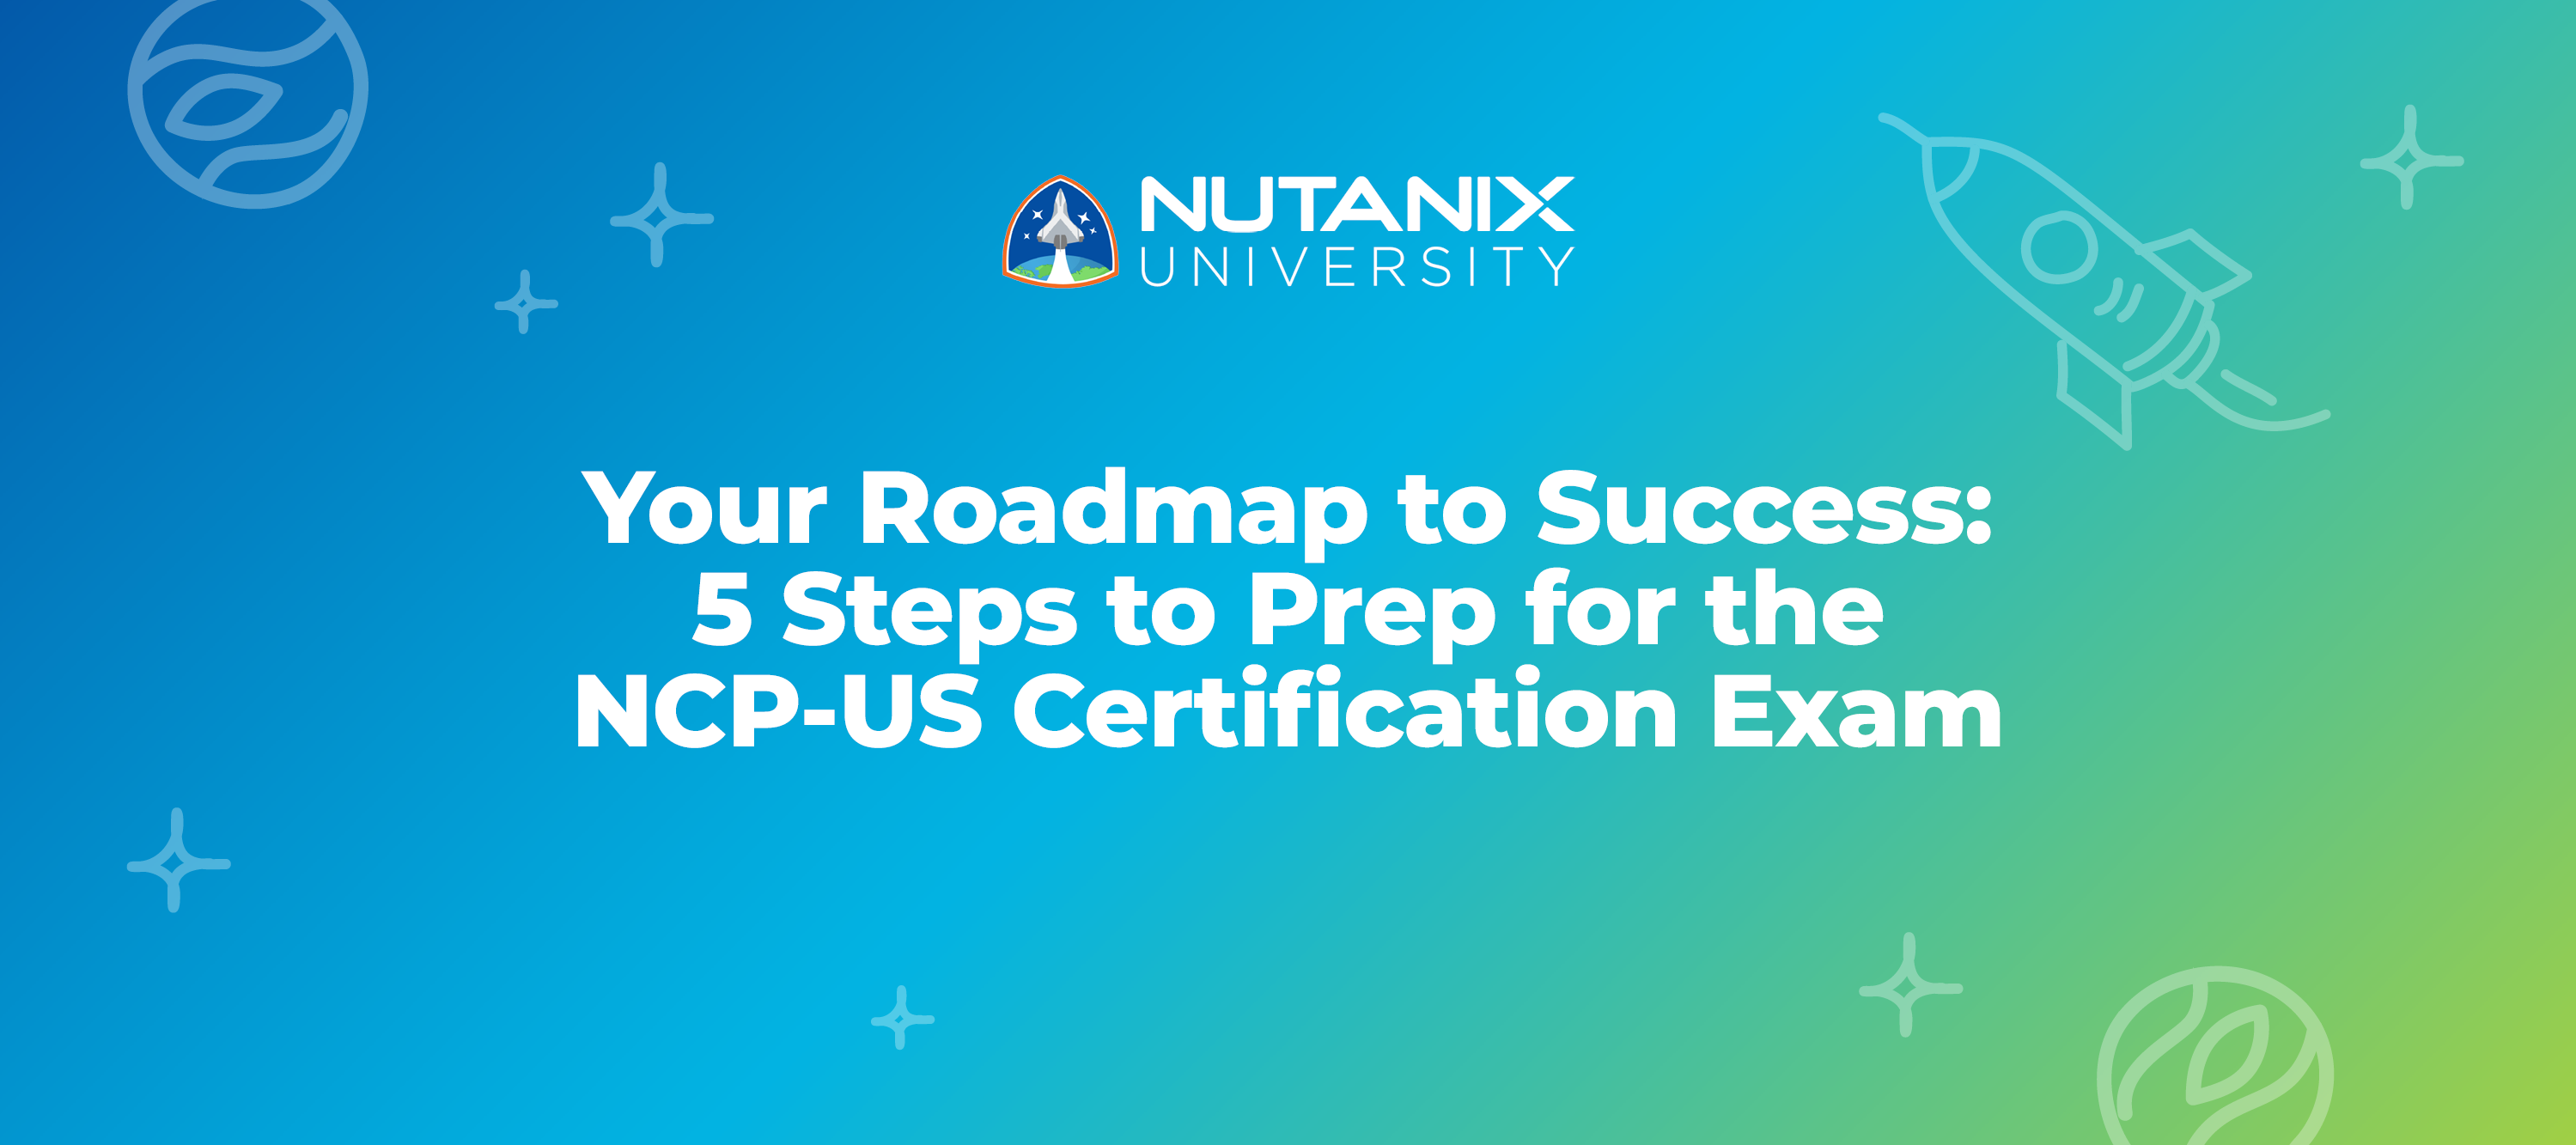 Your Roadmap to Success: 5 Steps to Prep for the NCP-US Certification Exam